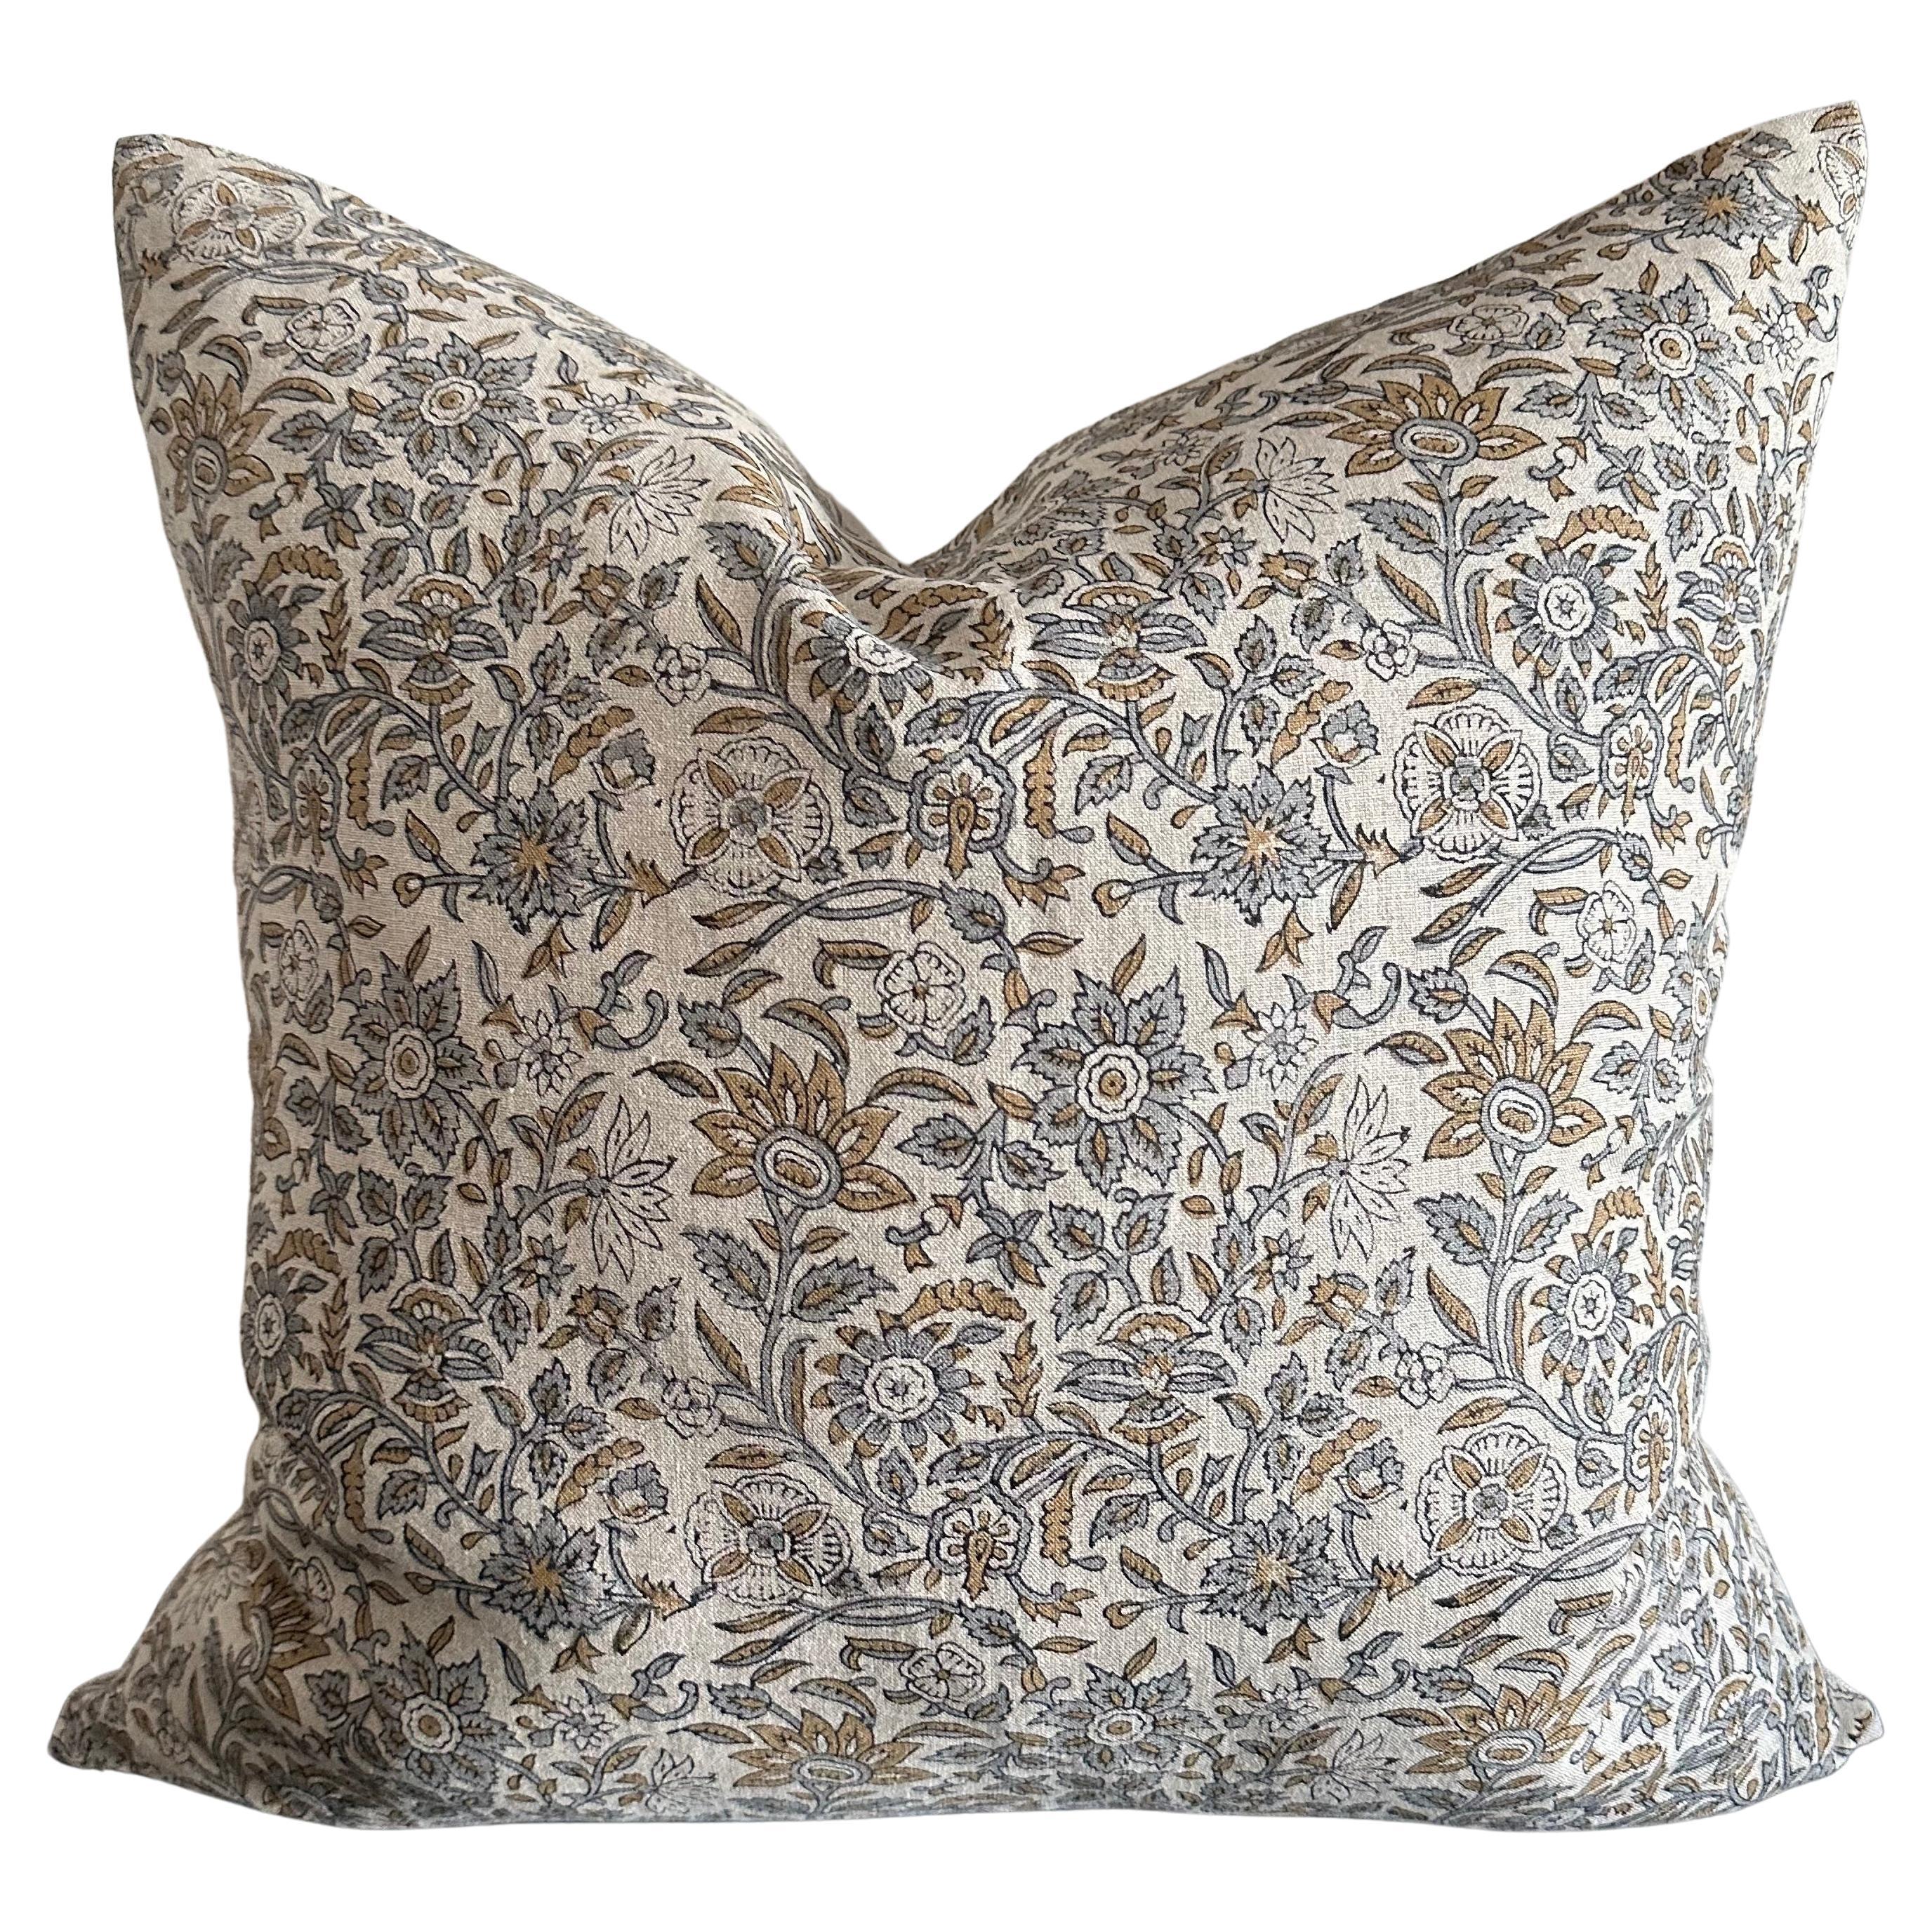 Visalia Block Printed Linen Pillow with Down Feather Insert For Sale